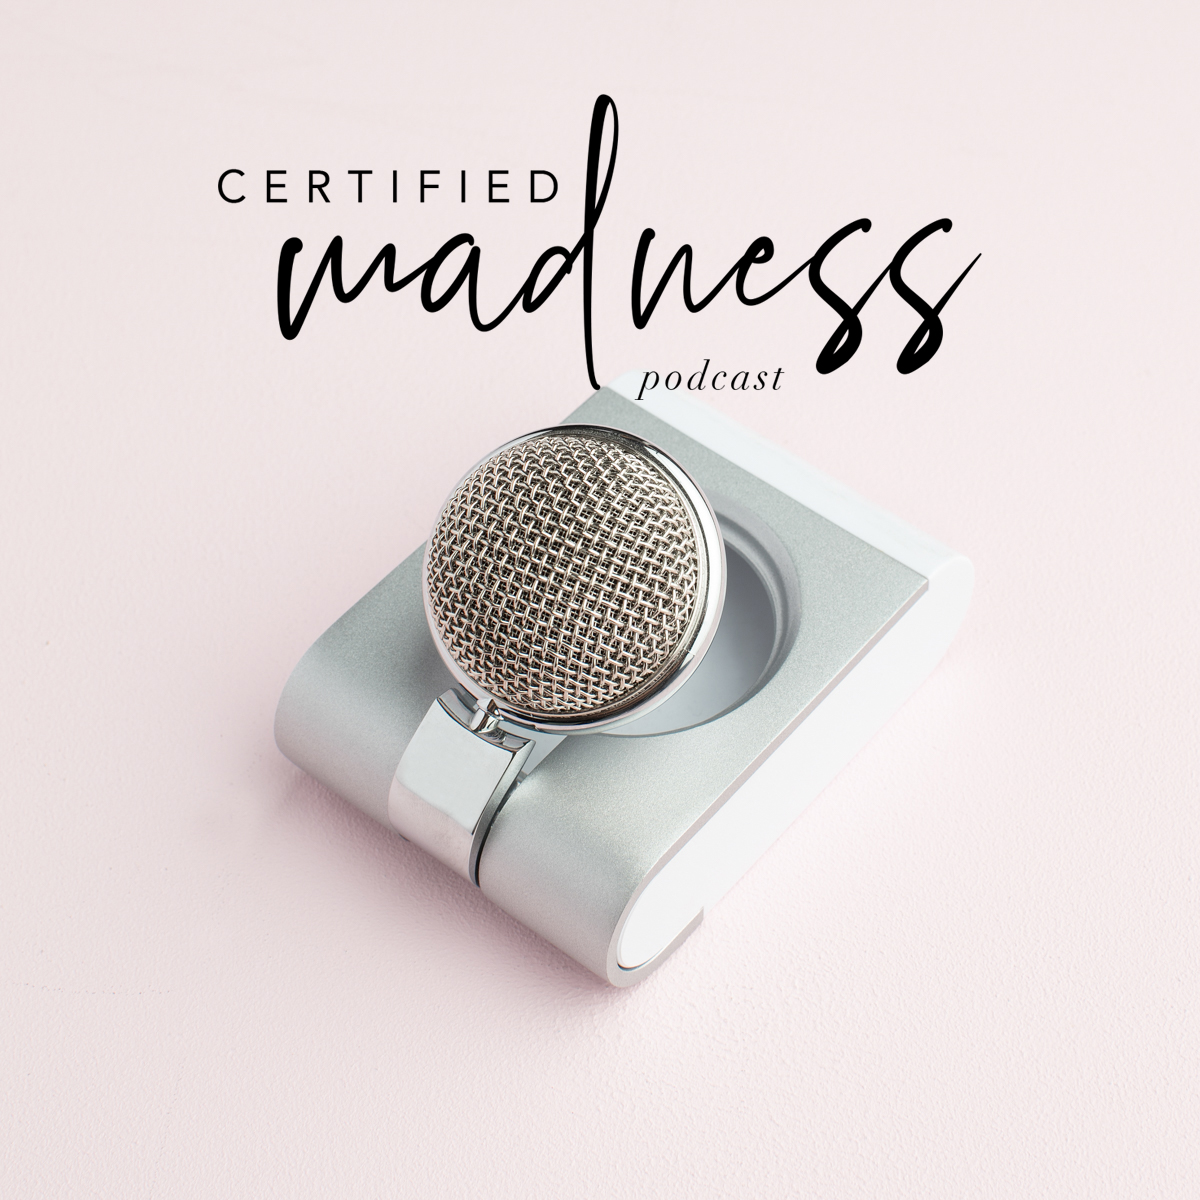 Certified Madness is a podcast by Holli True, Brittney Kluse, True Moua and Jolene Dombrowski, focused on the highs and lows of running a senior photography business